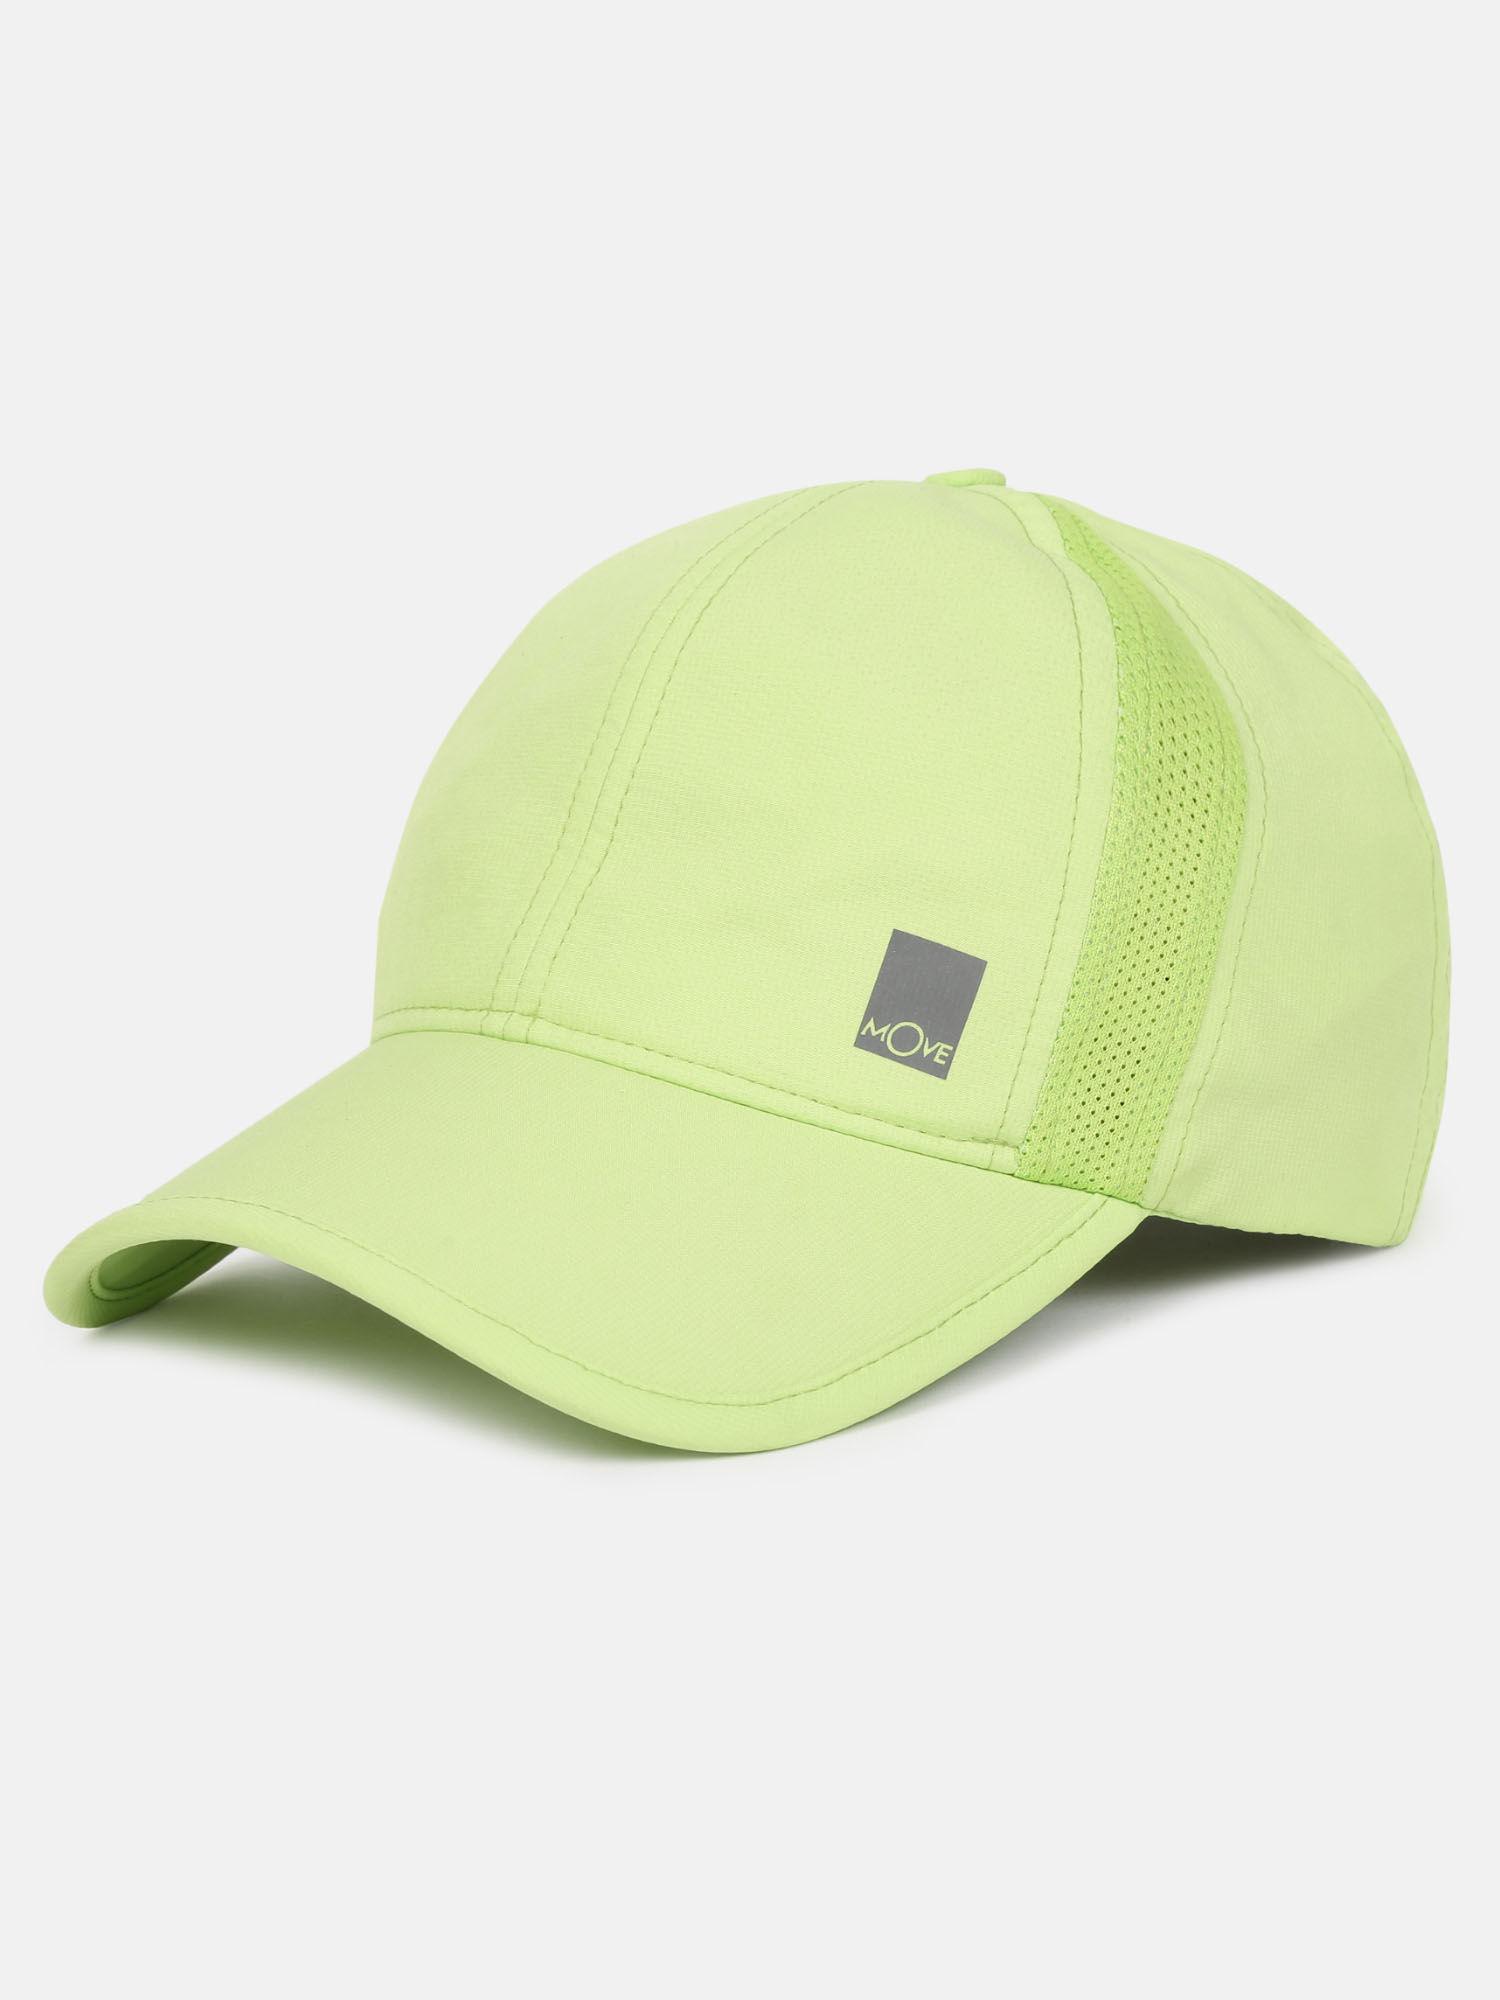 cp21-polyester-solid-cap-with-adjustable-back-closure-and-stay-dry-green-glow